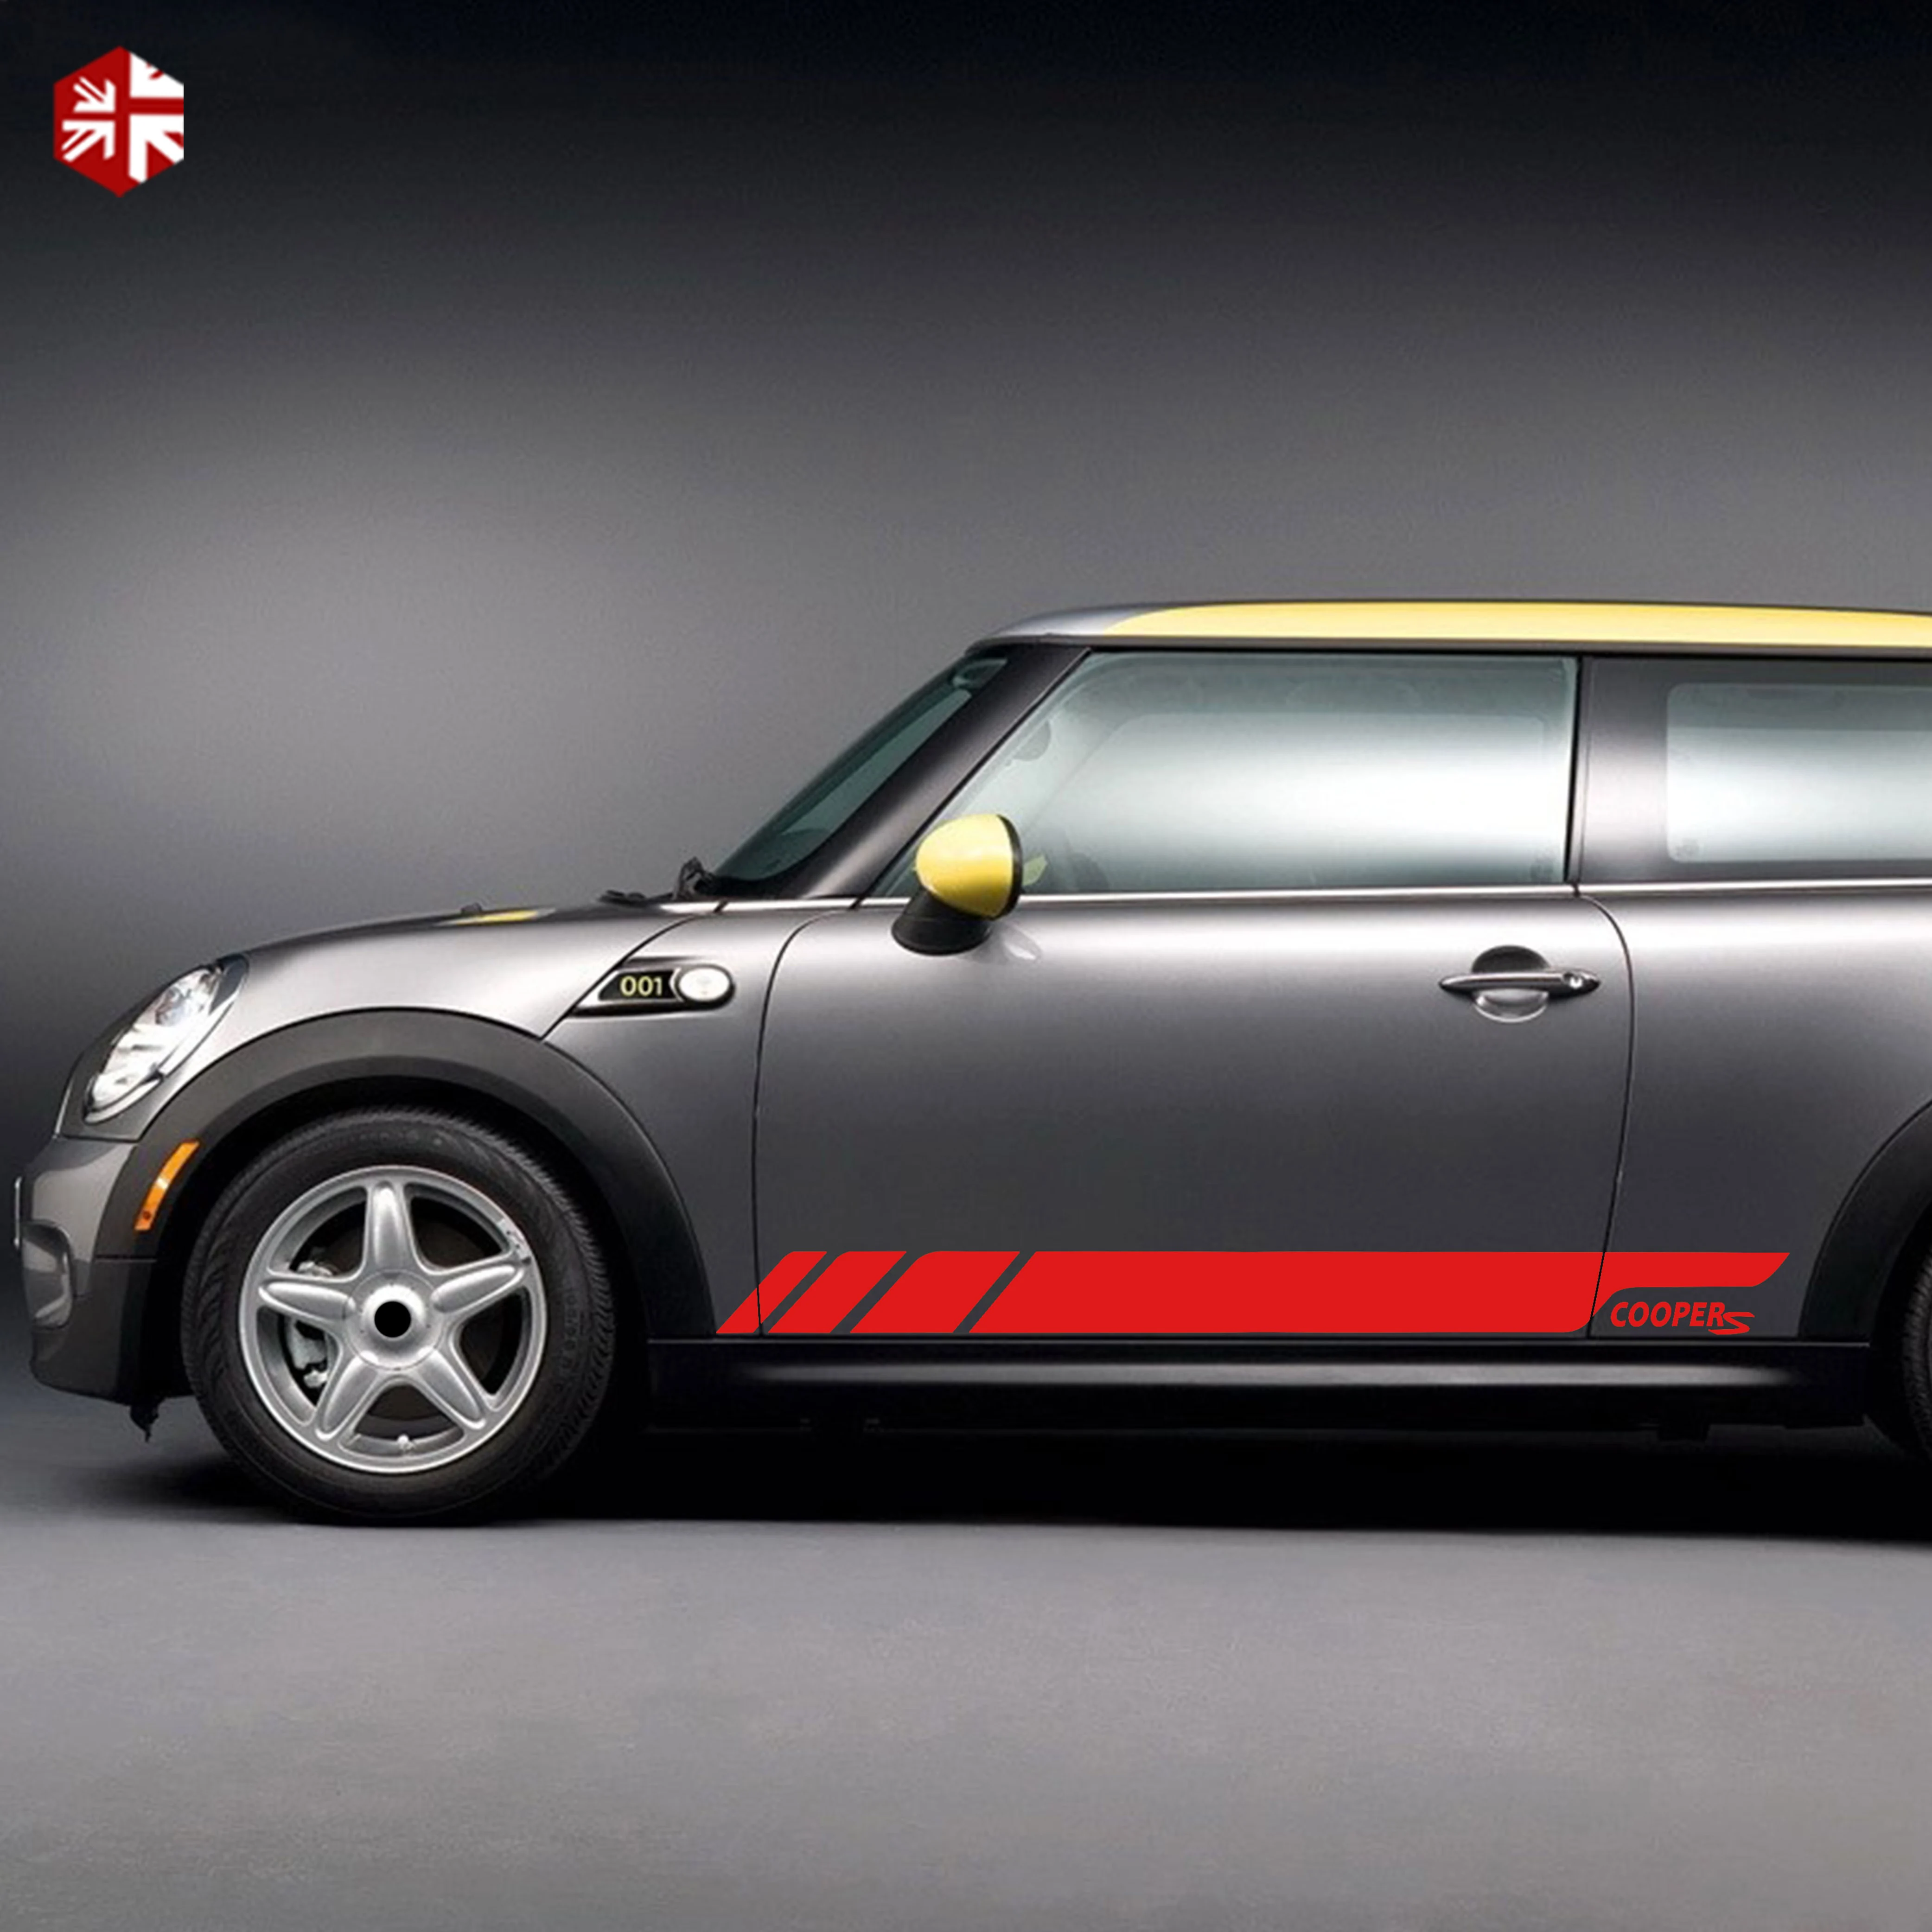 2 Pcs Car Styling Cooper S Graphics Vinyl Decal Racing Door Side Stripes Sticker For MINI Cooper S R56 One JCW  Accessories